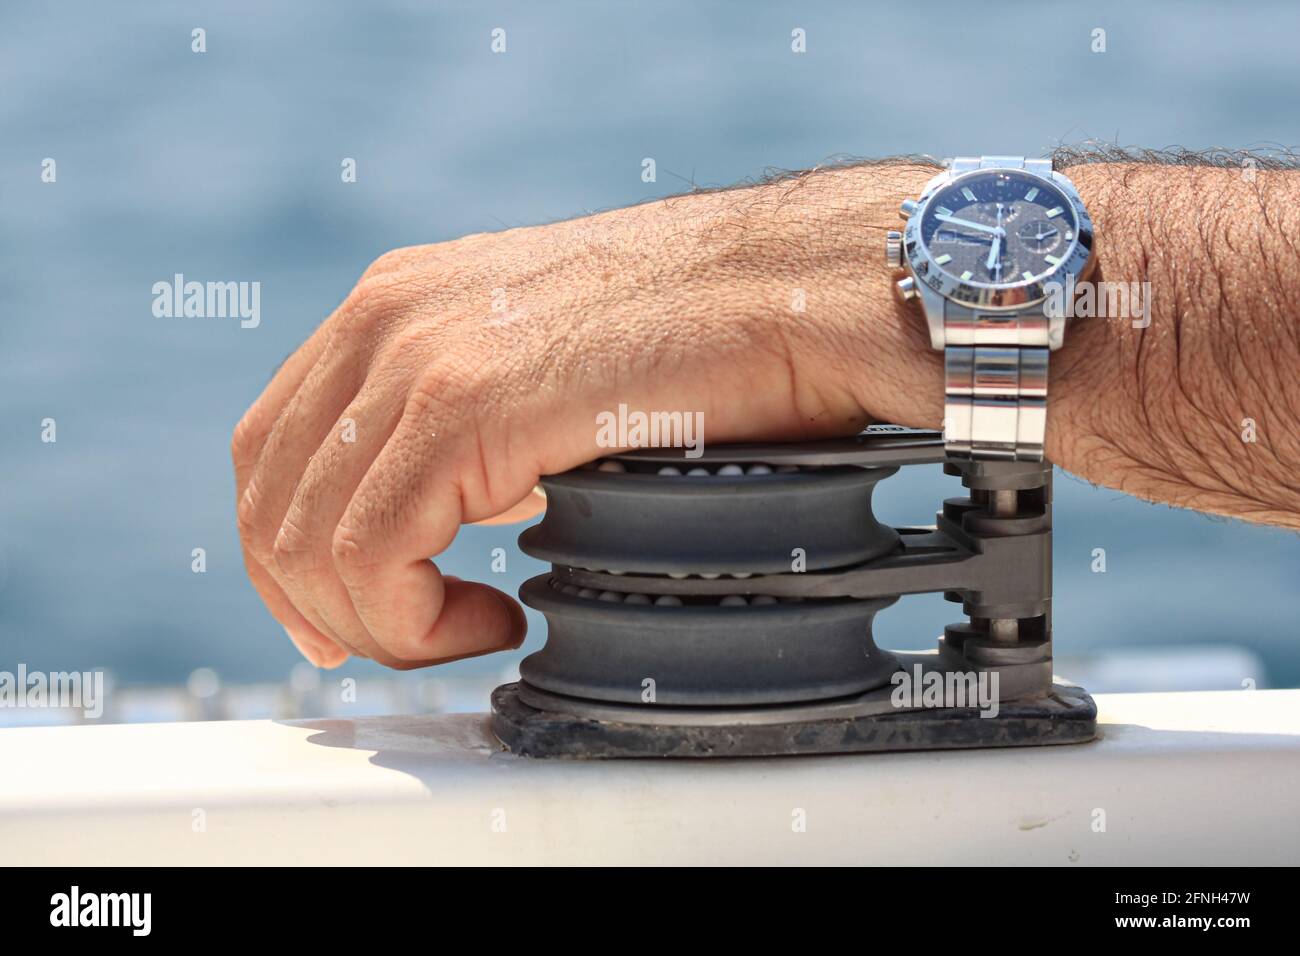 Sailor hand leaning on a winch of a sailing boat. Stock Photo